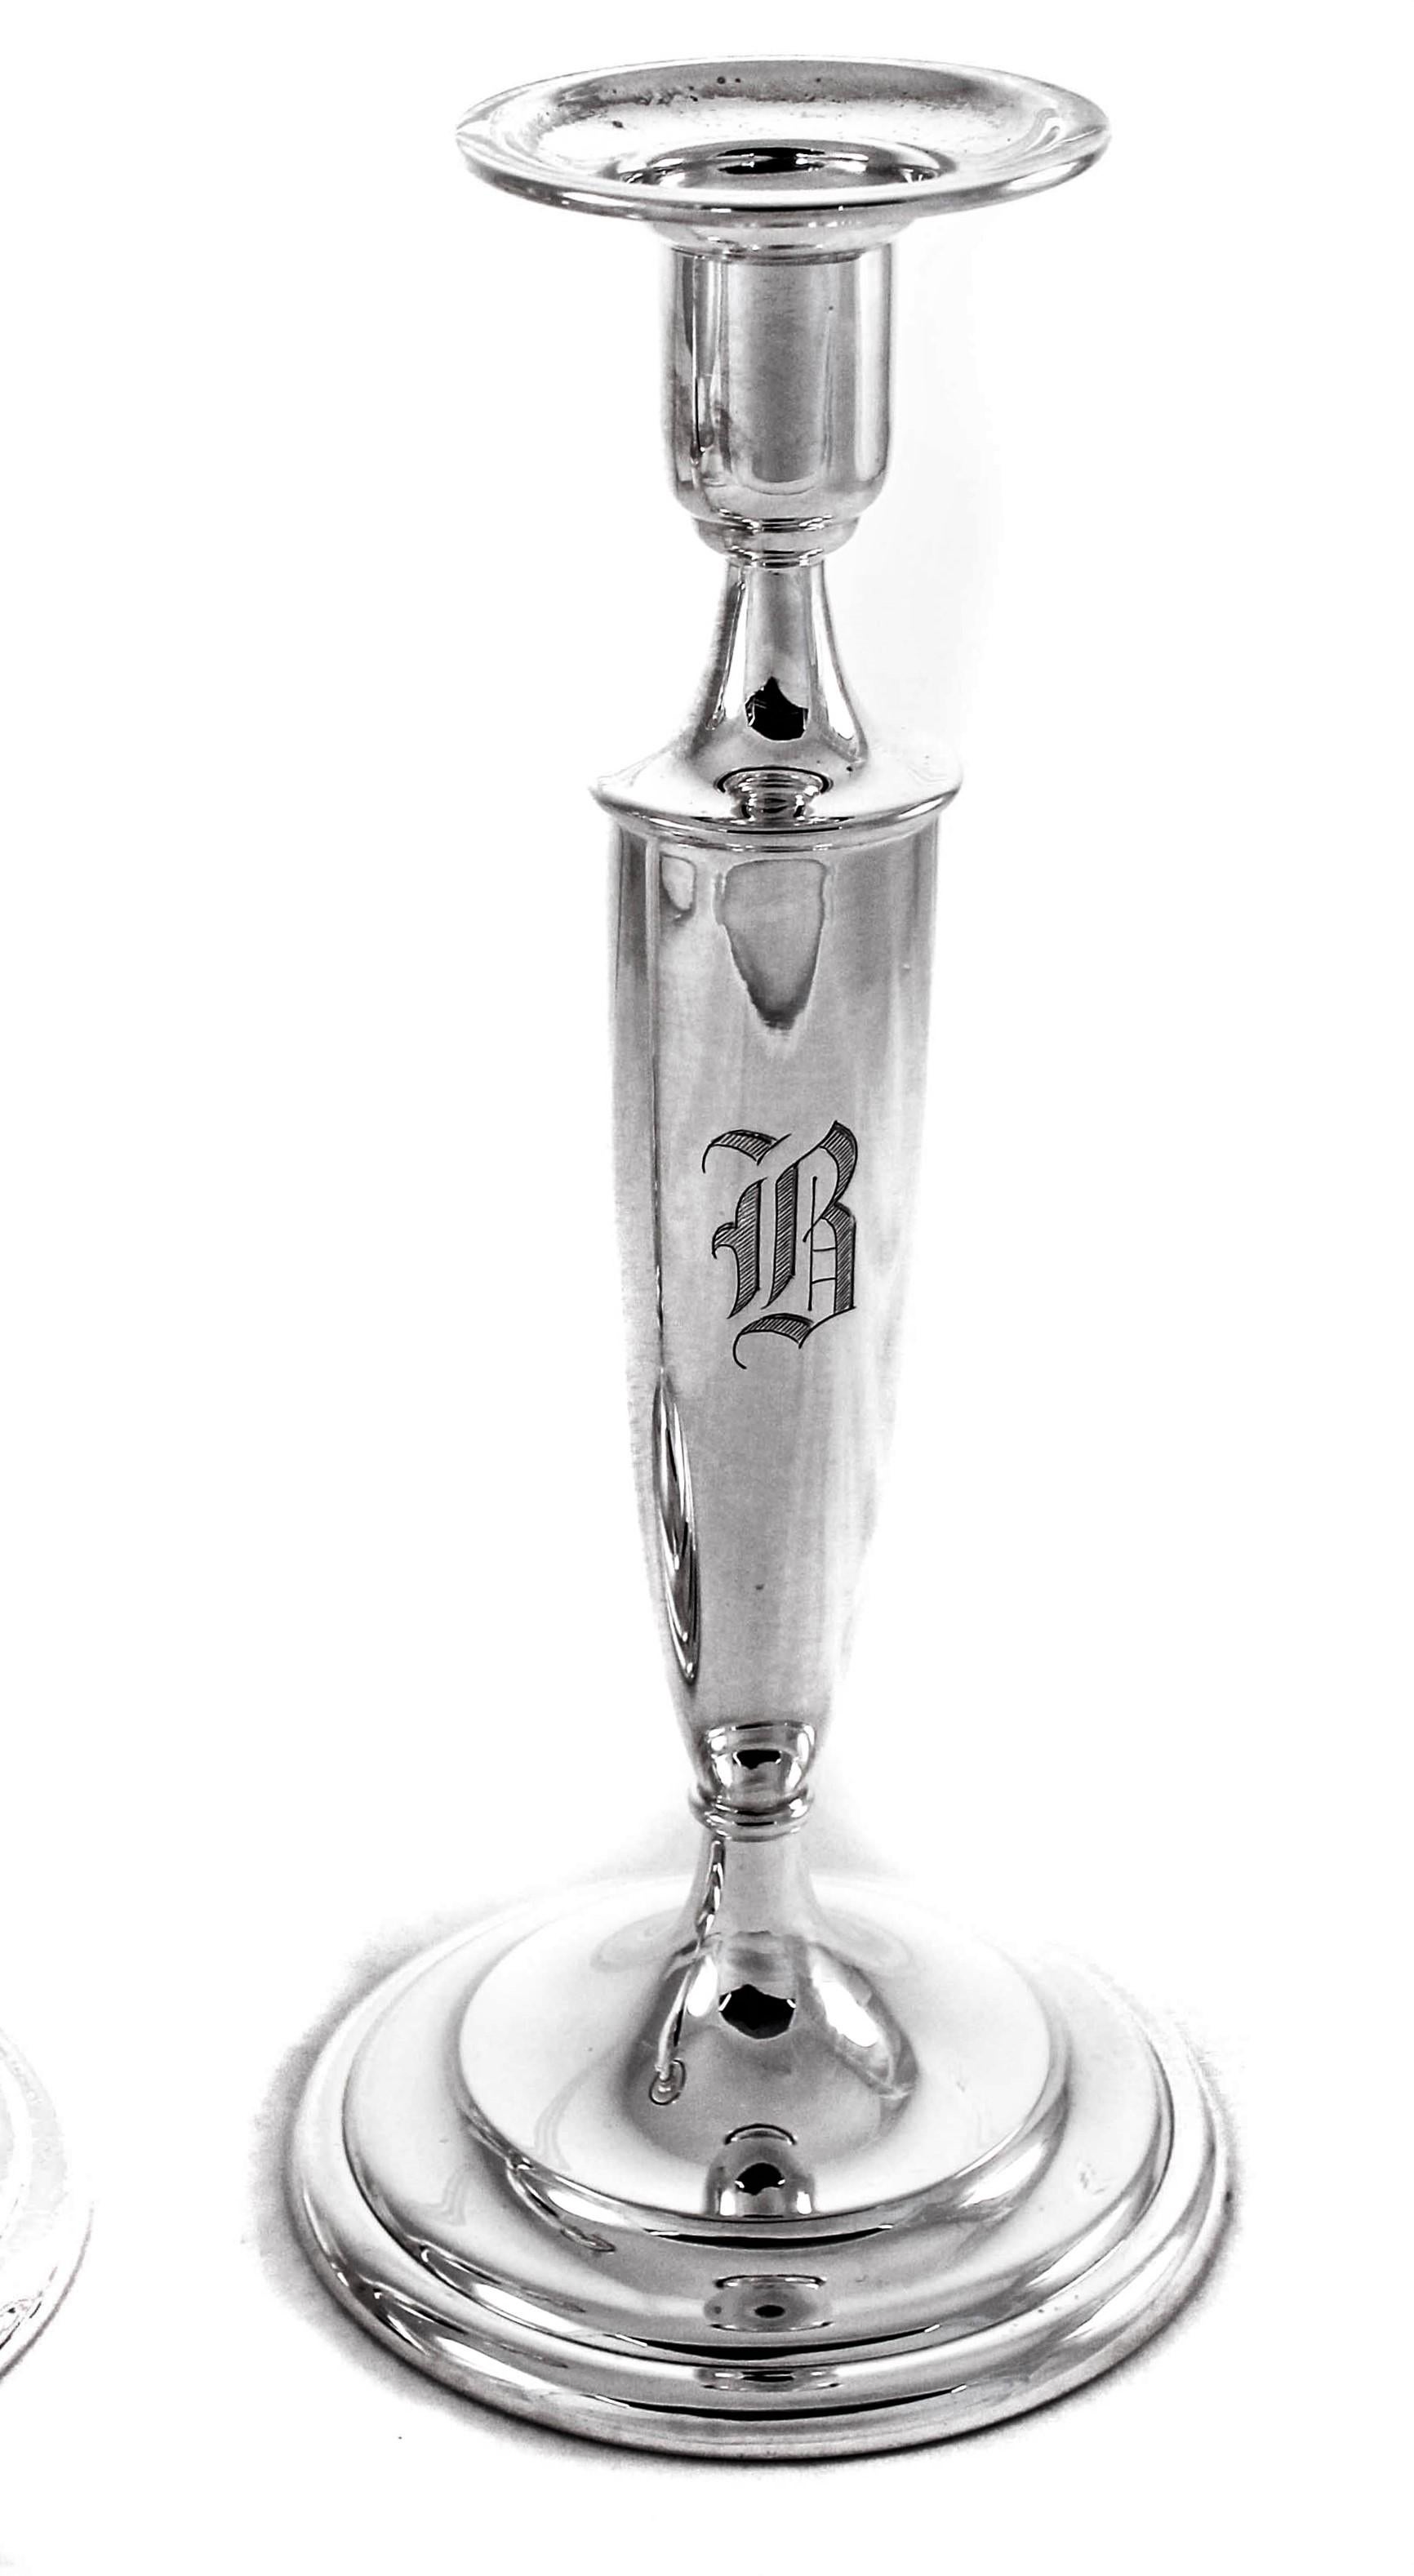 If simple and clean are adjectives that help describe your taste in silver, these are up your alley. They have no etching or decoration, just a nice shape and lines. They are not weighted and have a hand engraved Old English B monogram. A classy and